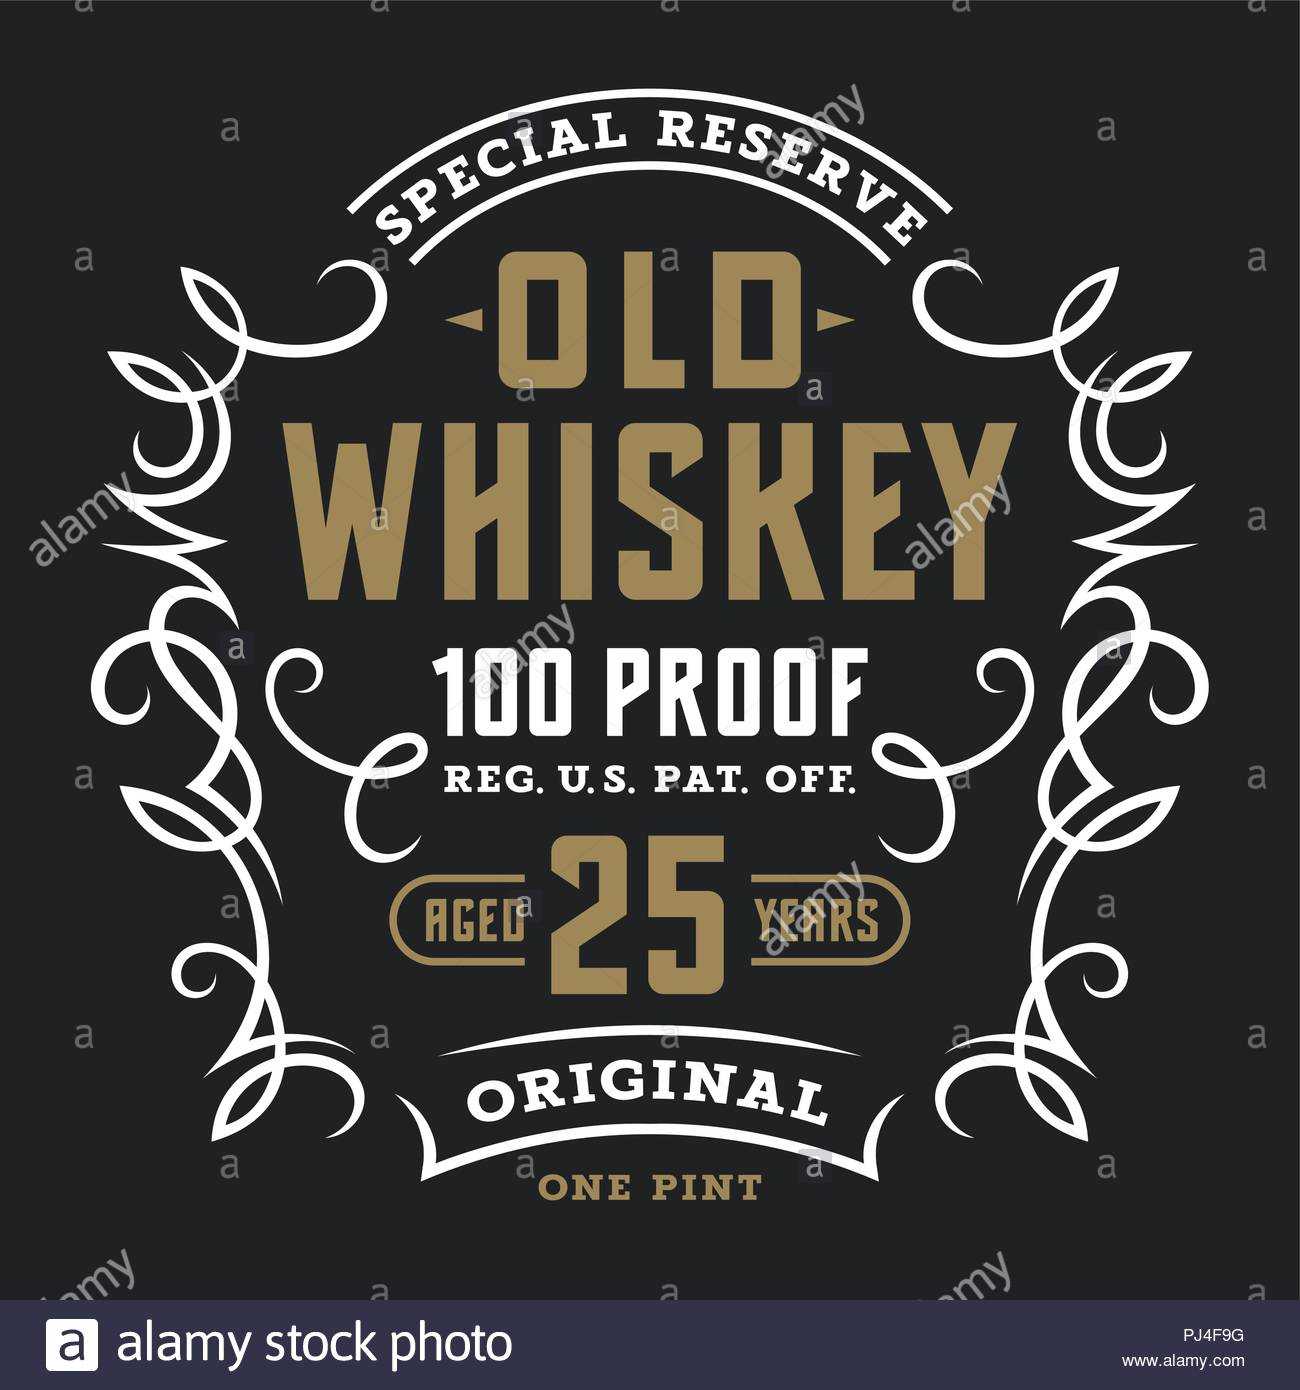 Whiskey Label Stock Photos & Whiskey Label Stock Images – Alamy With Regard To Blank Jack Daniels Label Template